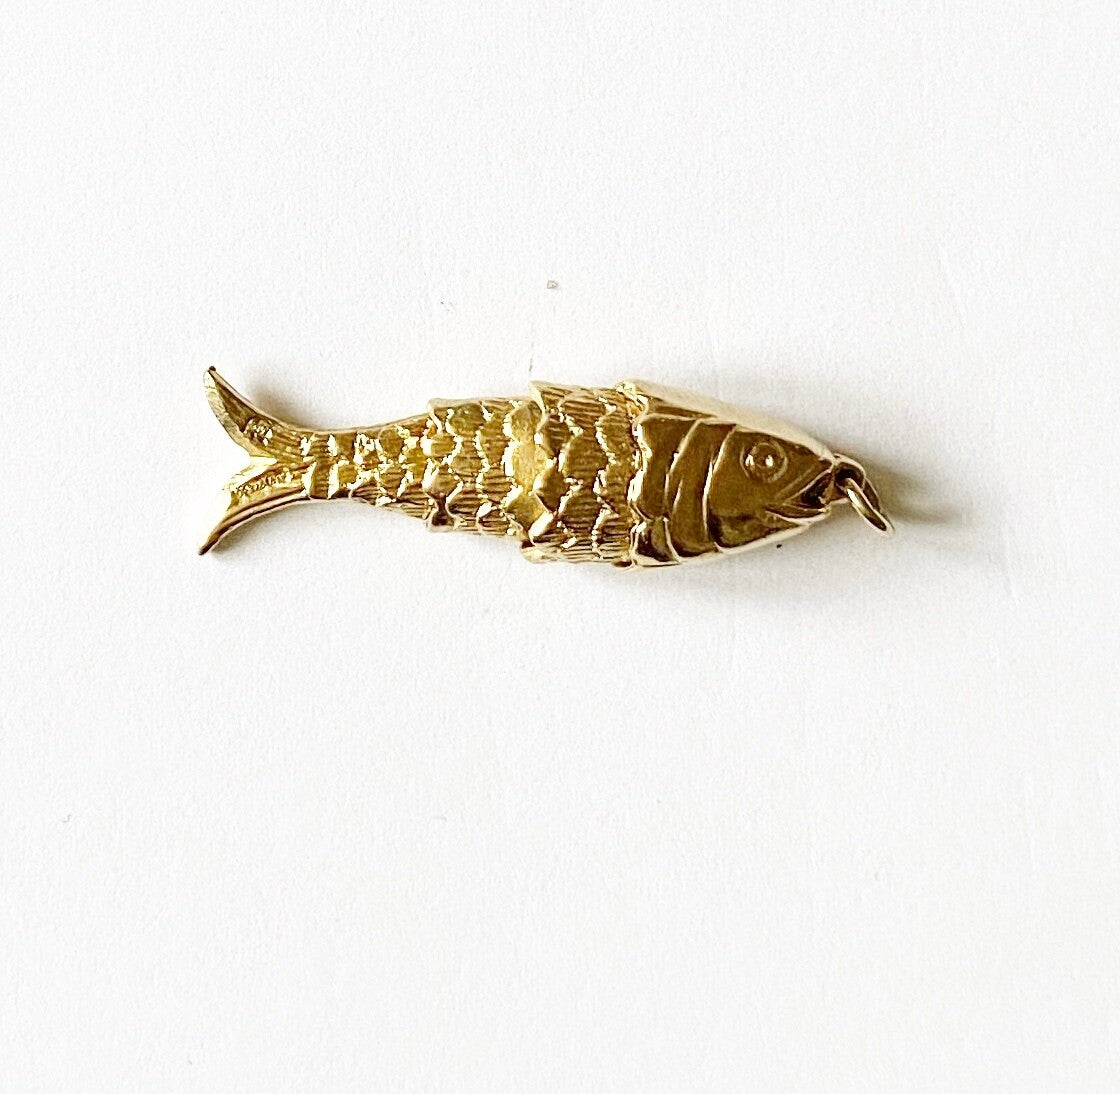 9ct vintage articulated fish charm circa 1969 5.2g